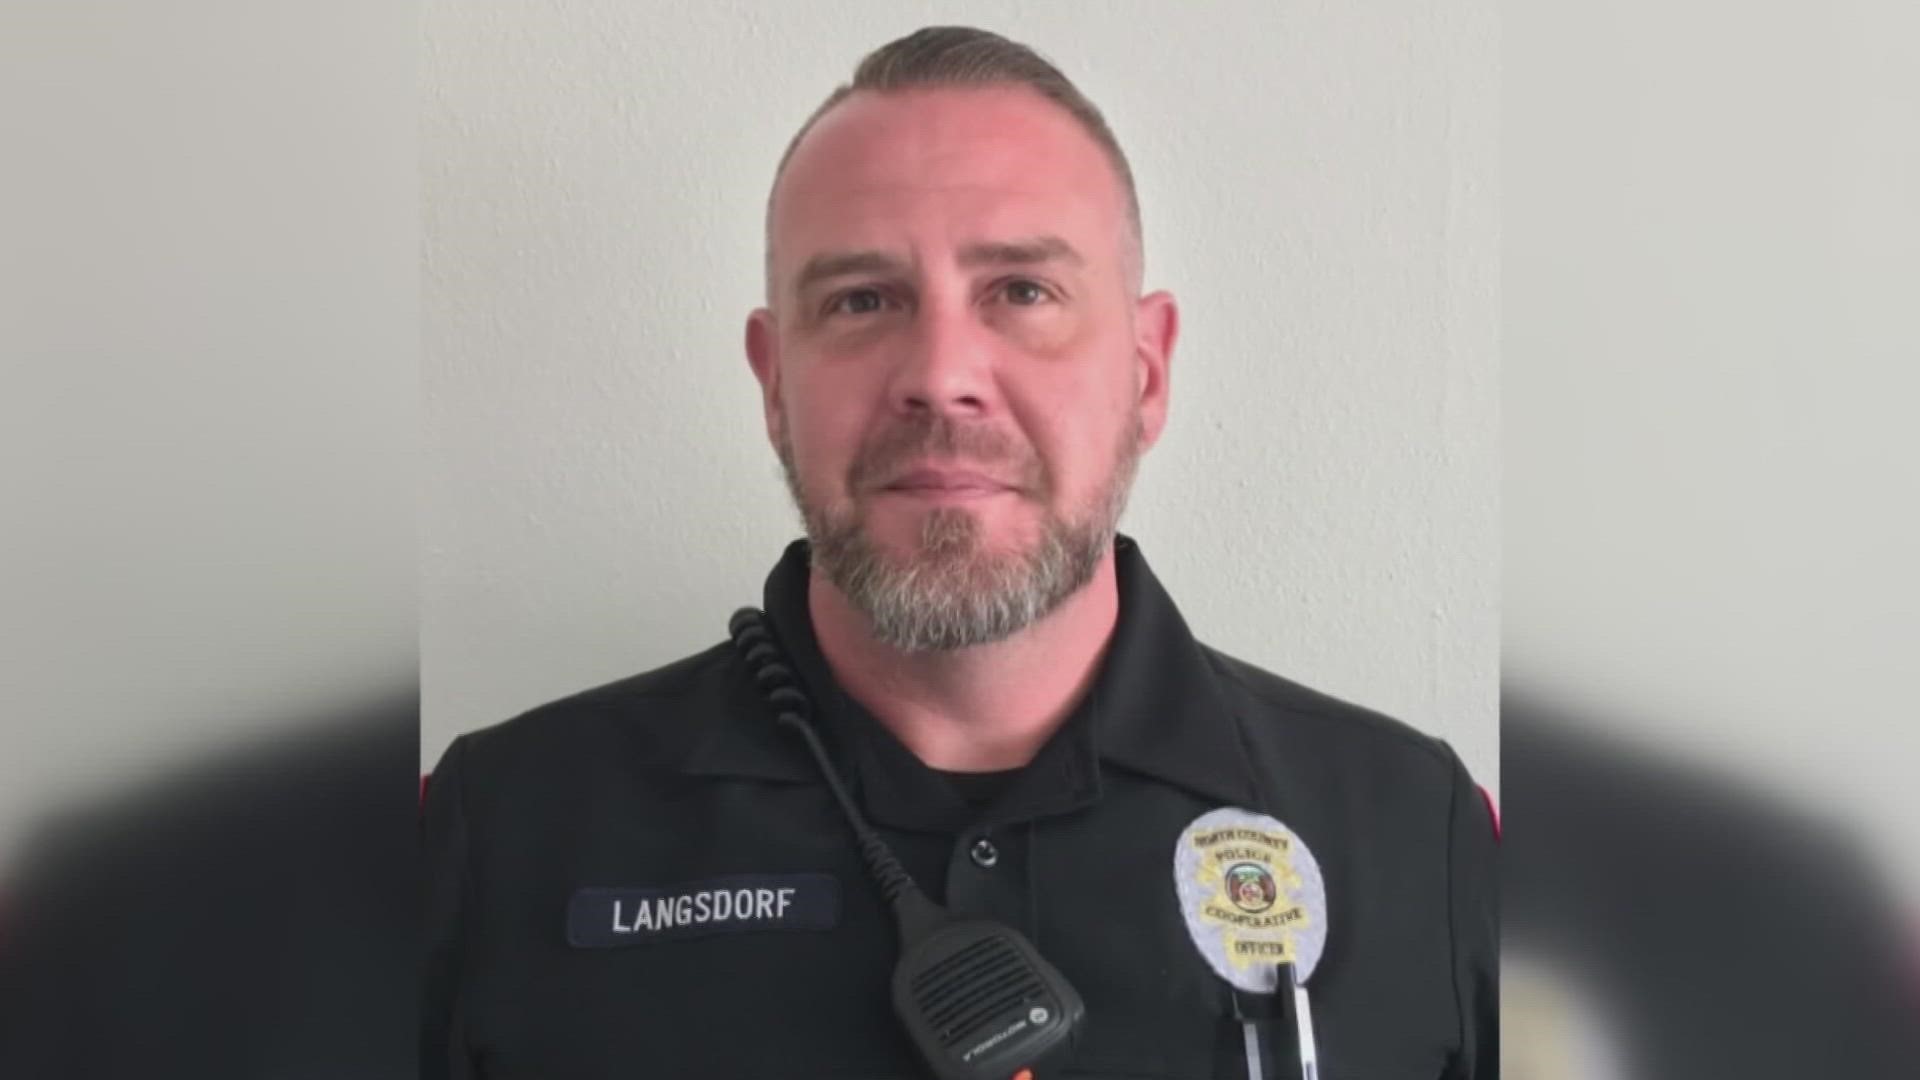 Officer Michael Langsdorf was killed in 2018 while responding to a report about a bad check at Wellston Market.